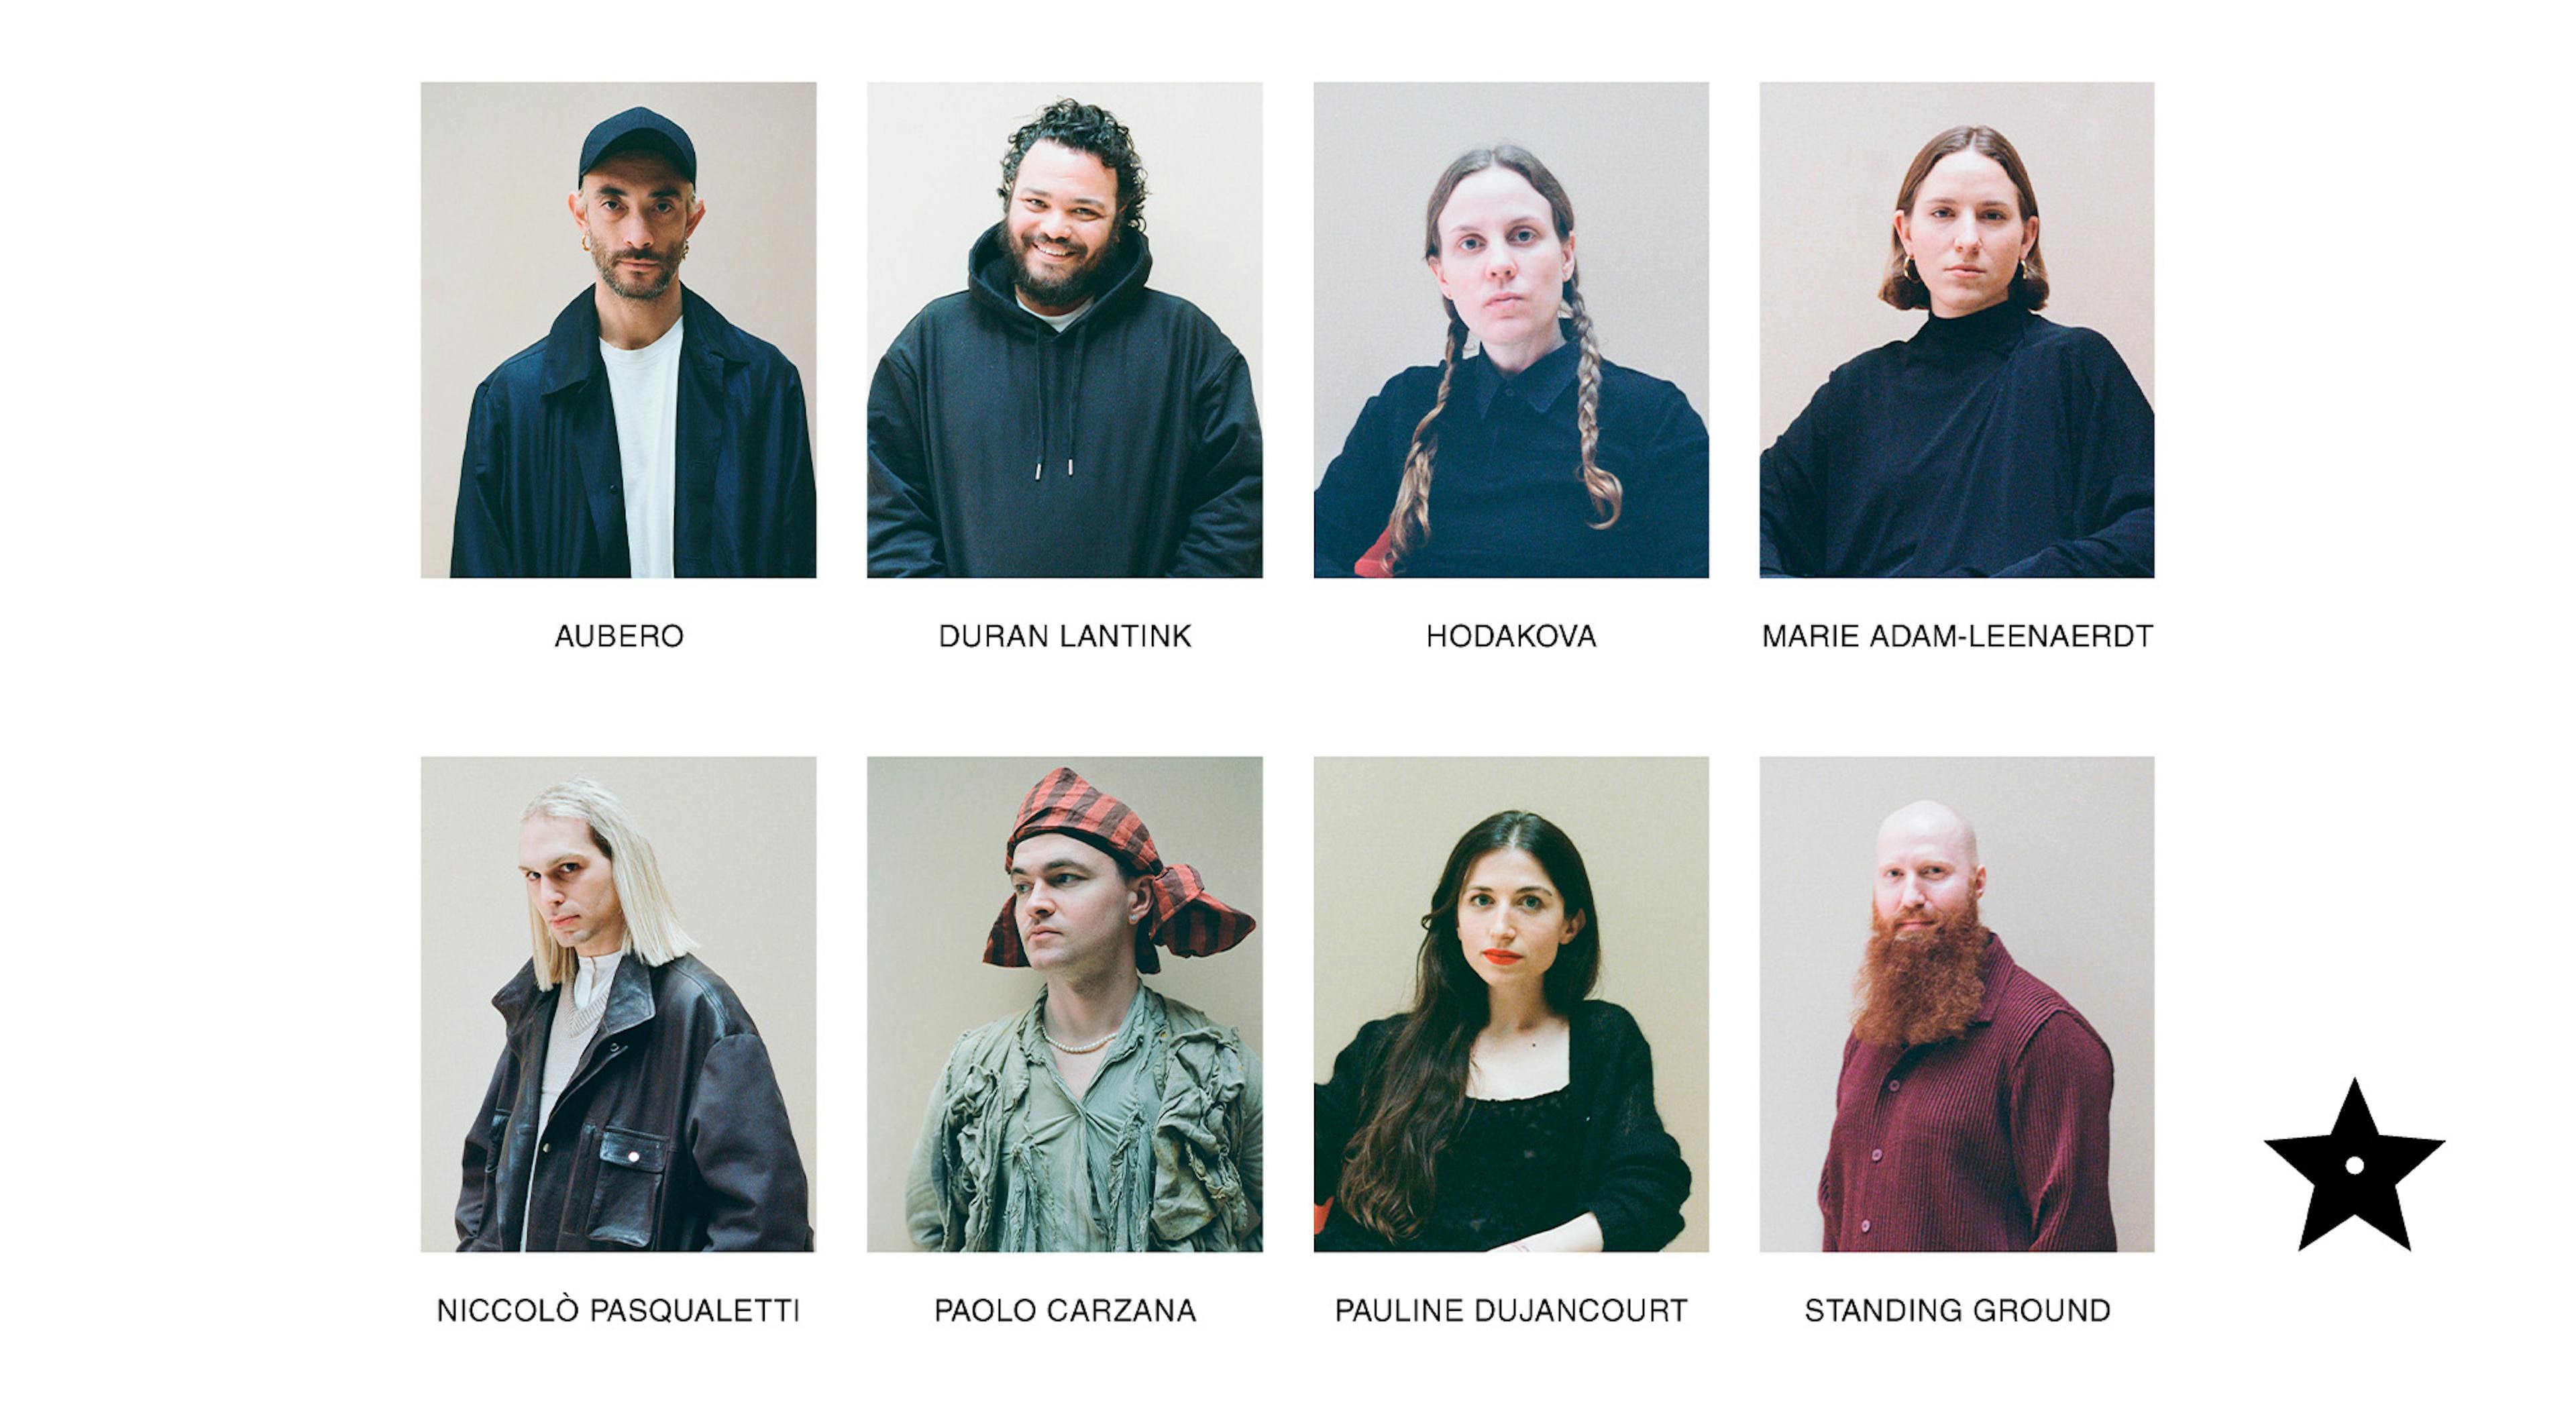 The 8 LVMH Prize finalists